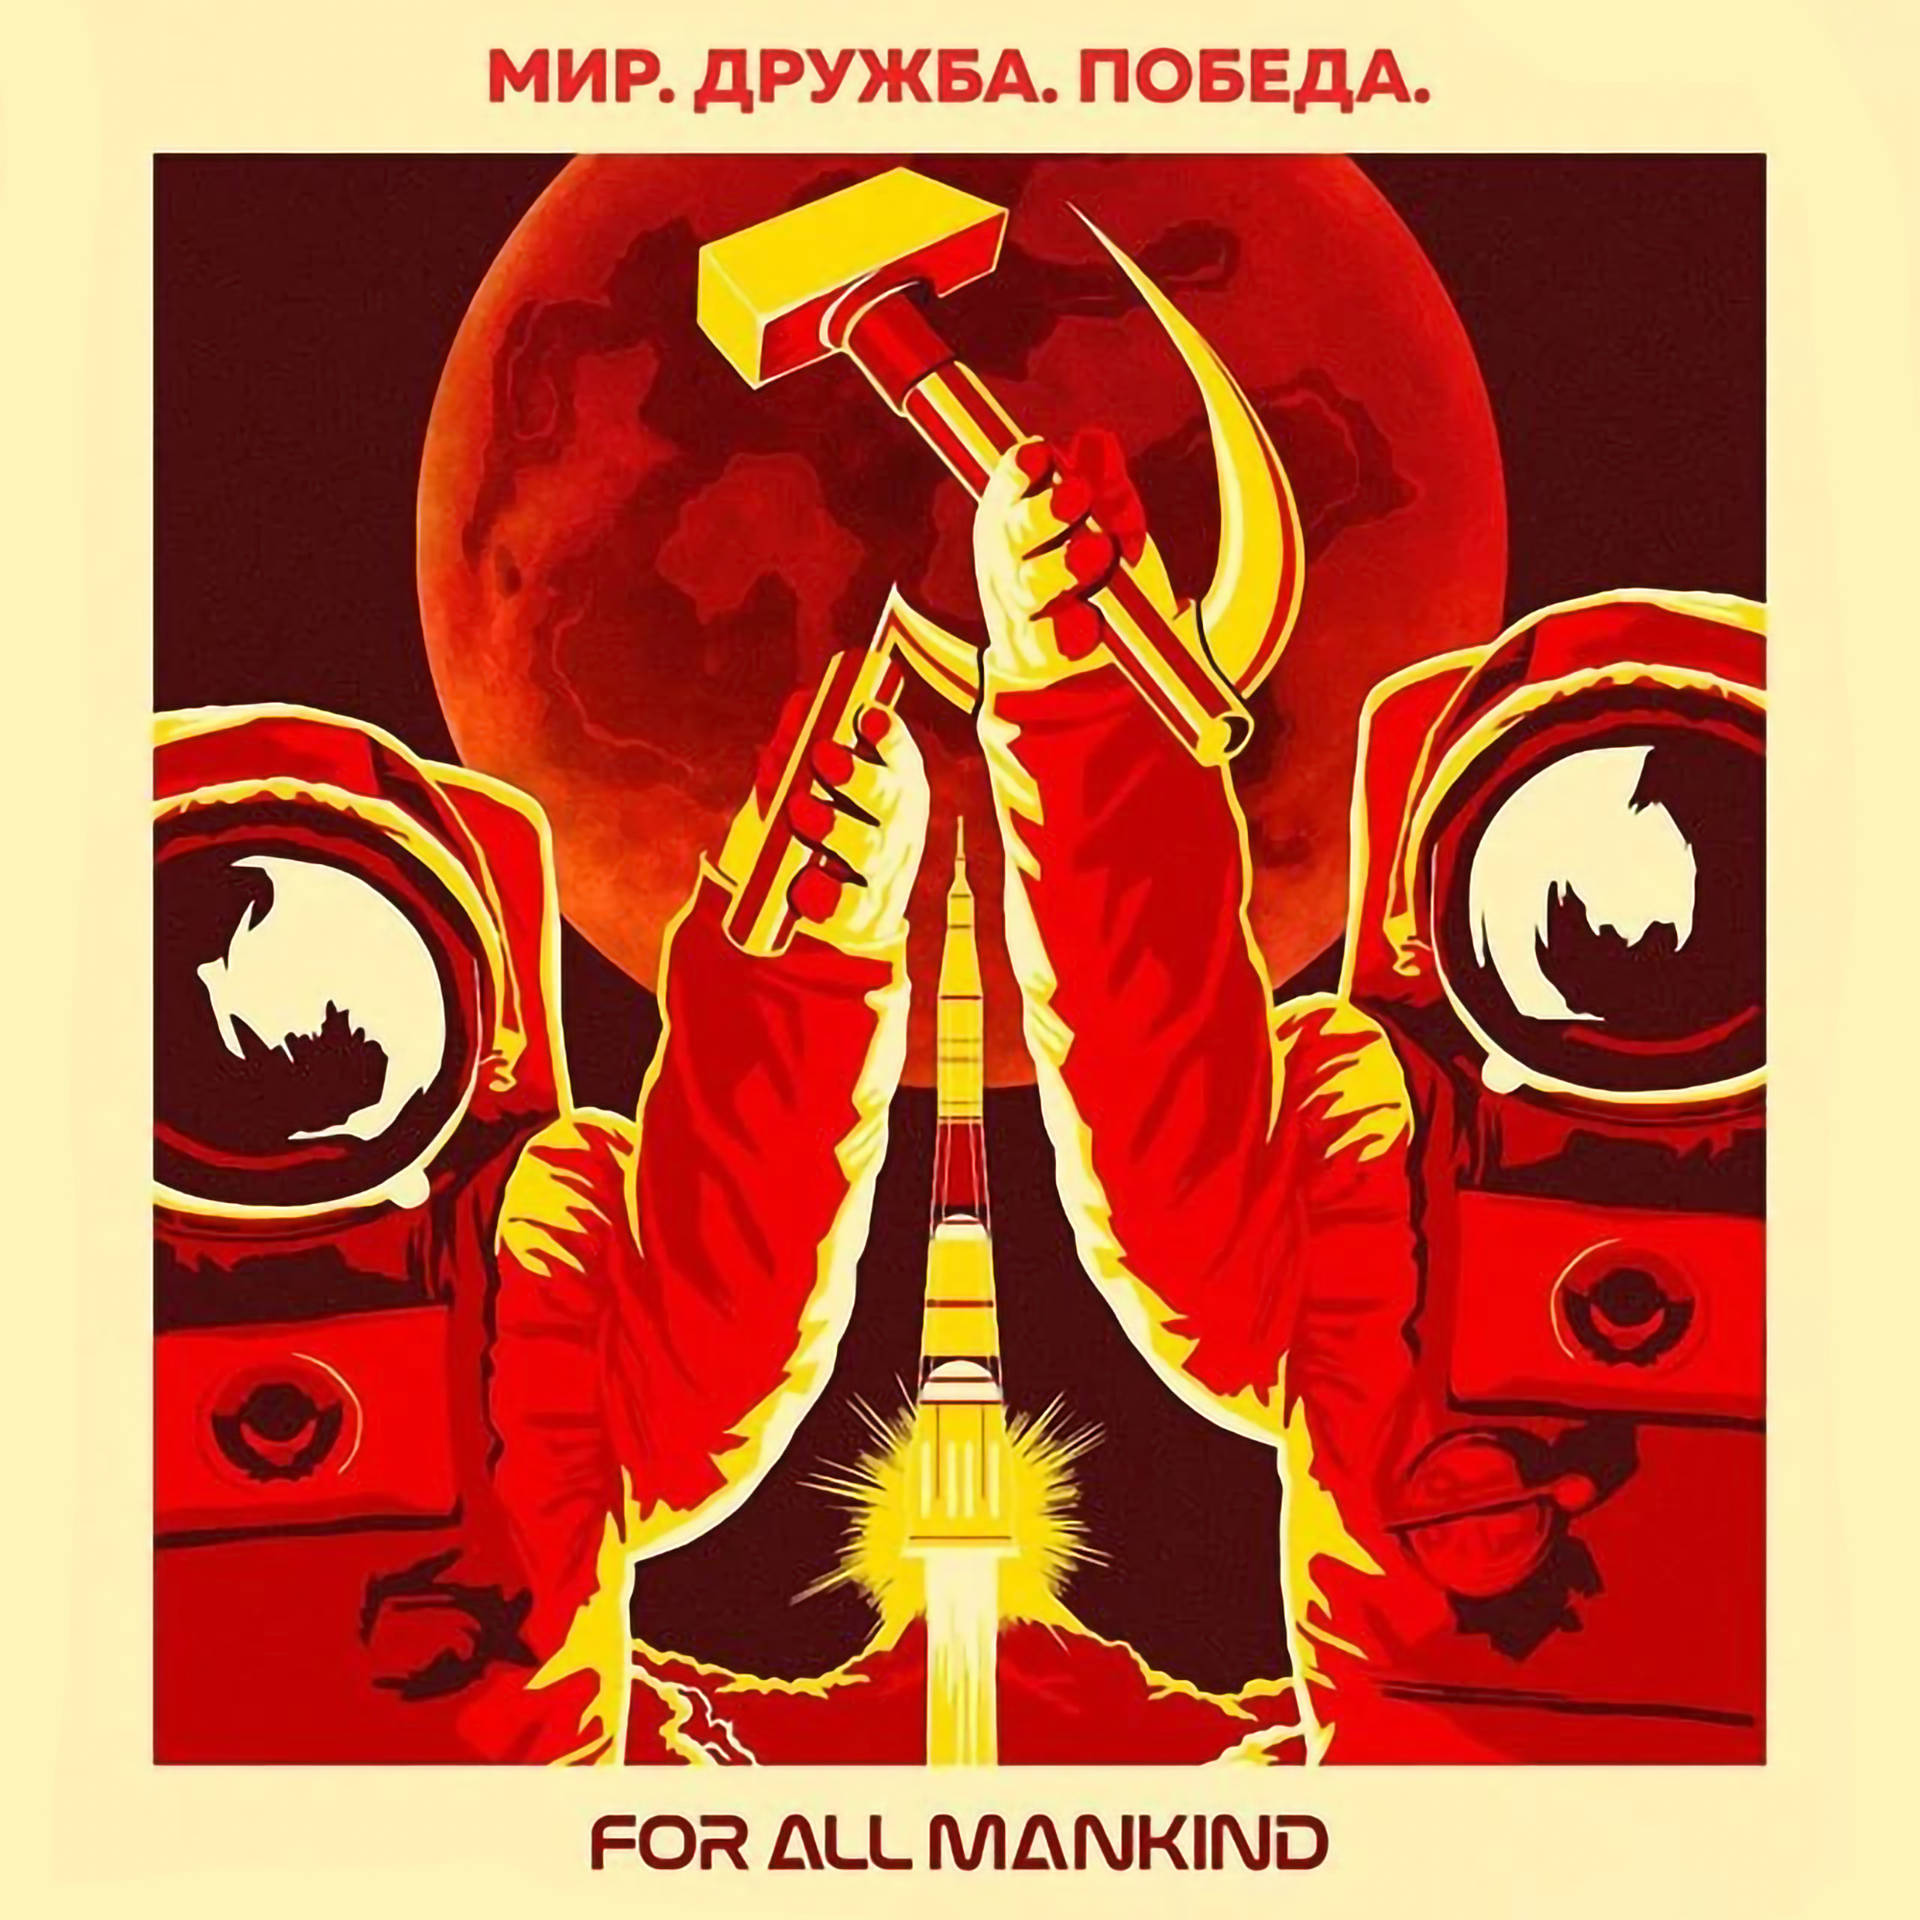 For All Mankind Ussr Fanart